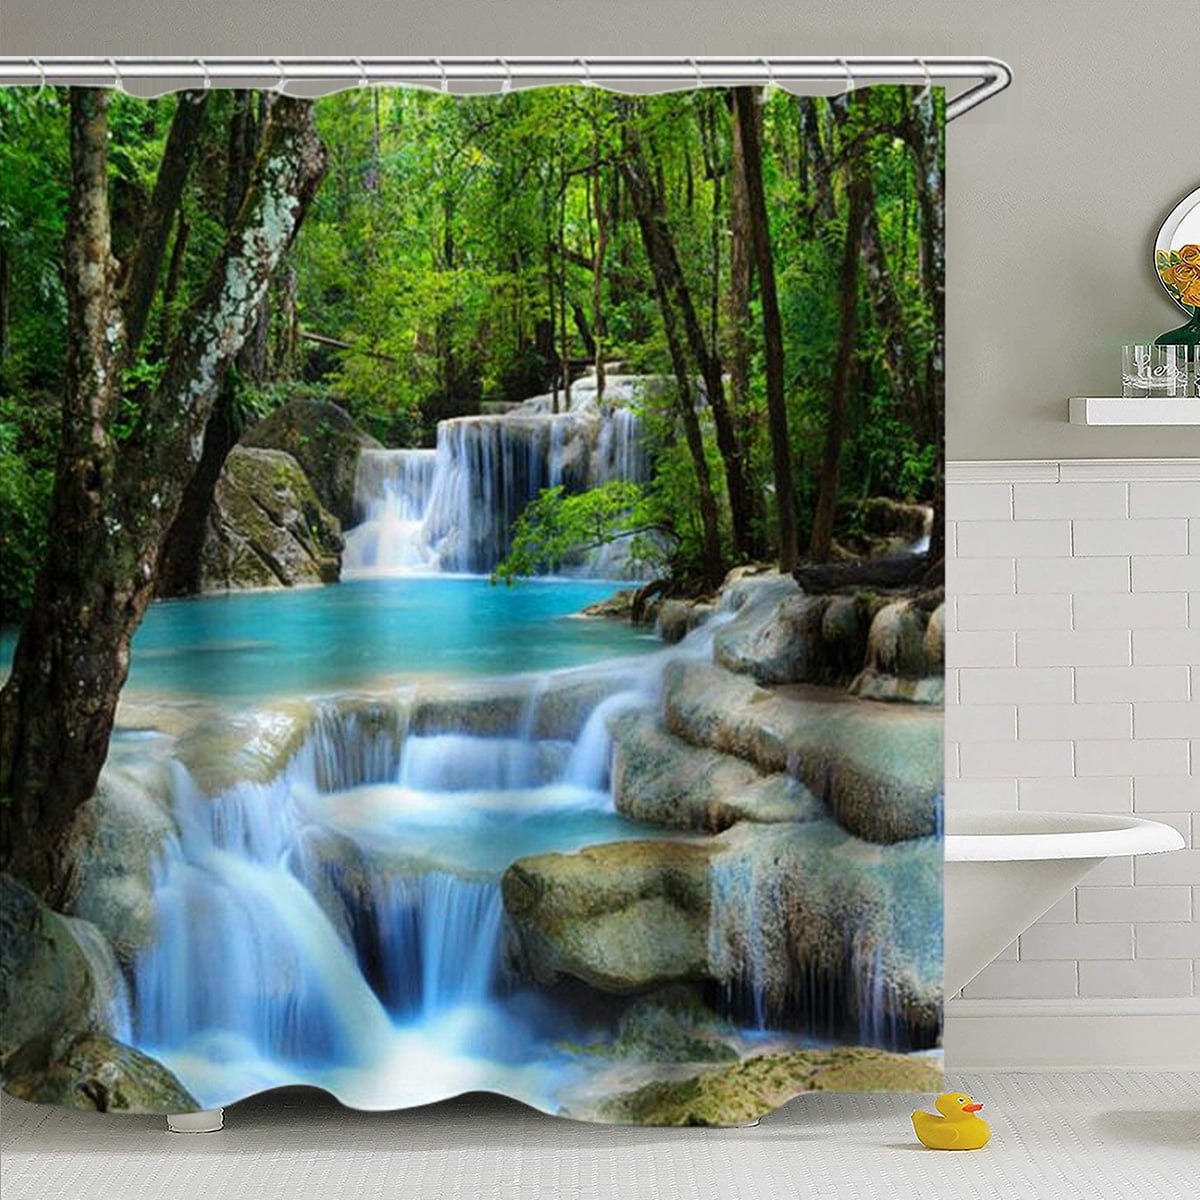 Waterfall and Colorful leaves Shower Curtain Waterproof Fabric w/12 Hooks new 